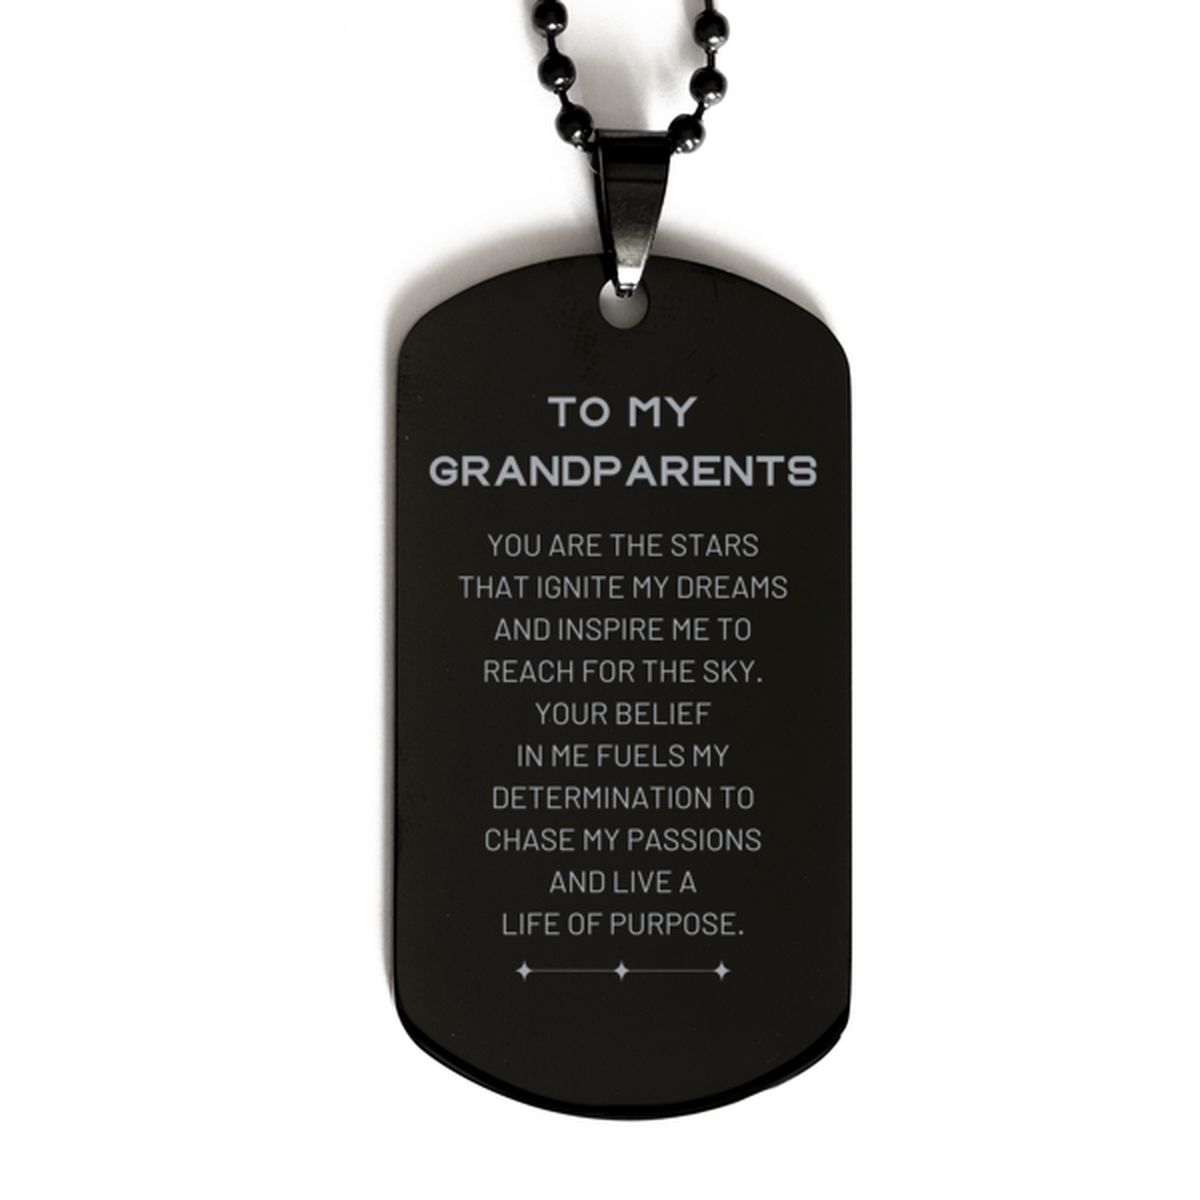 To My Grandparents Black Dog Tag, You are the stars that ignite my dreams and inspire me to reach for the sky, Birthday Unique Gifts For Grandparents, Thank You Gifts For Grandparents